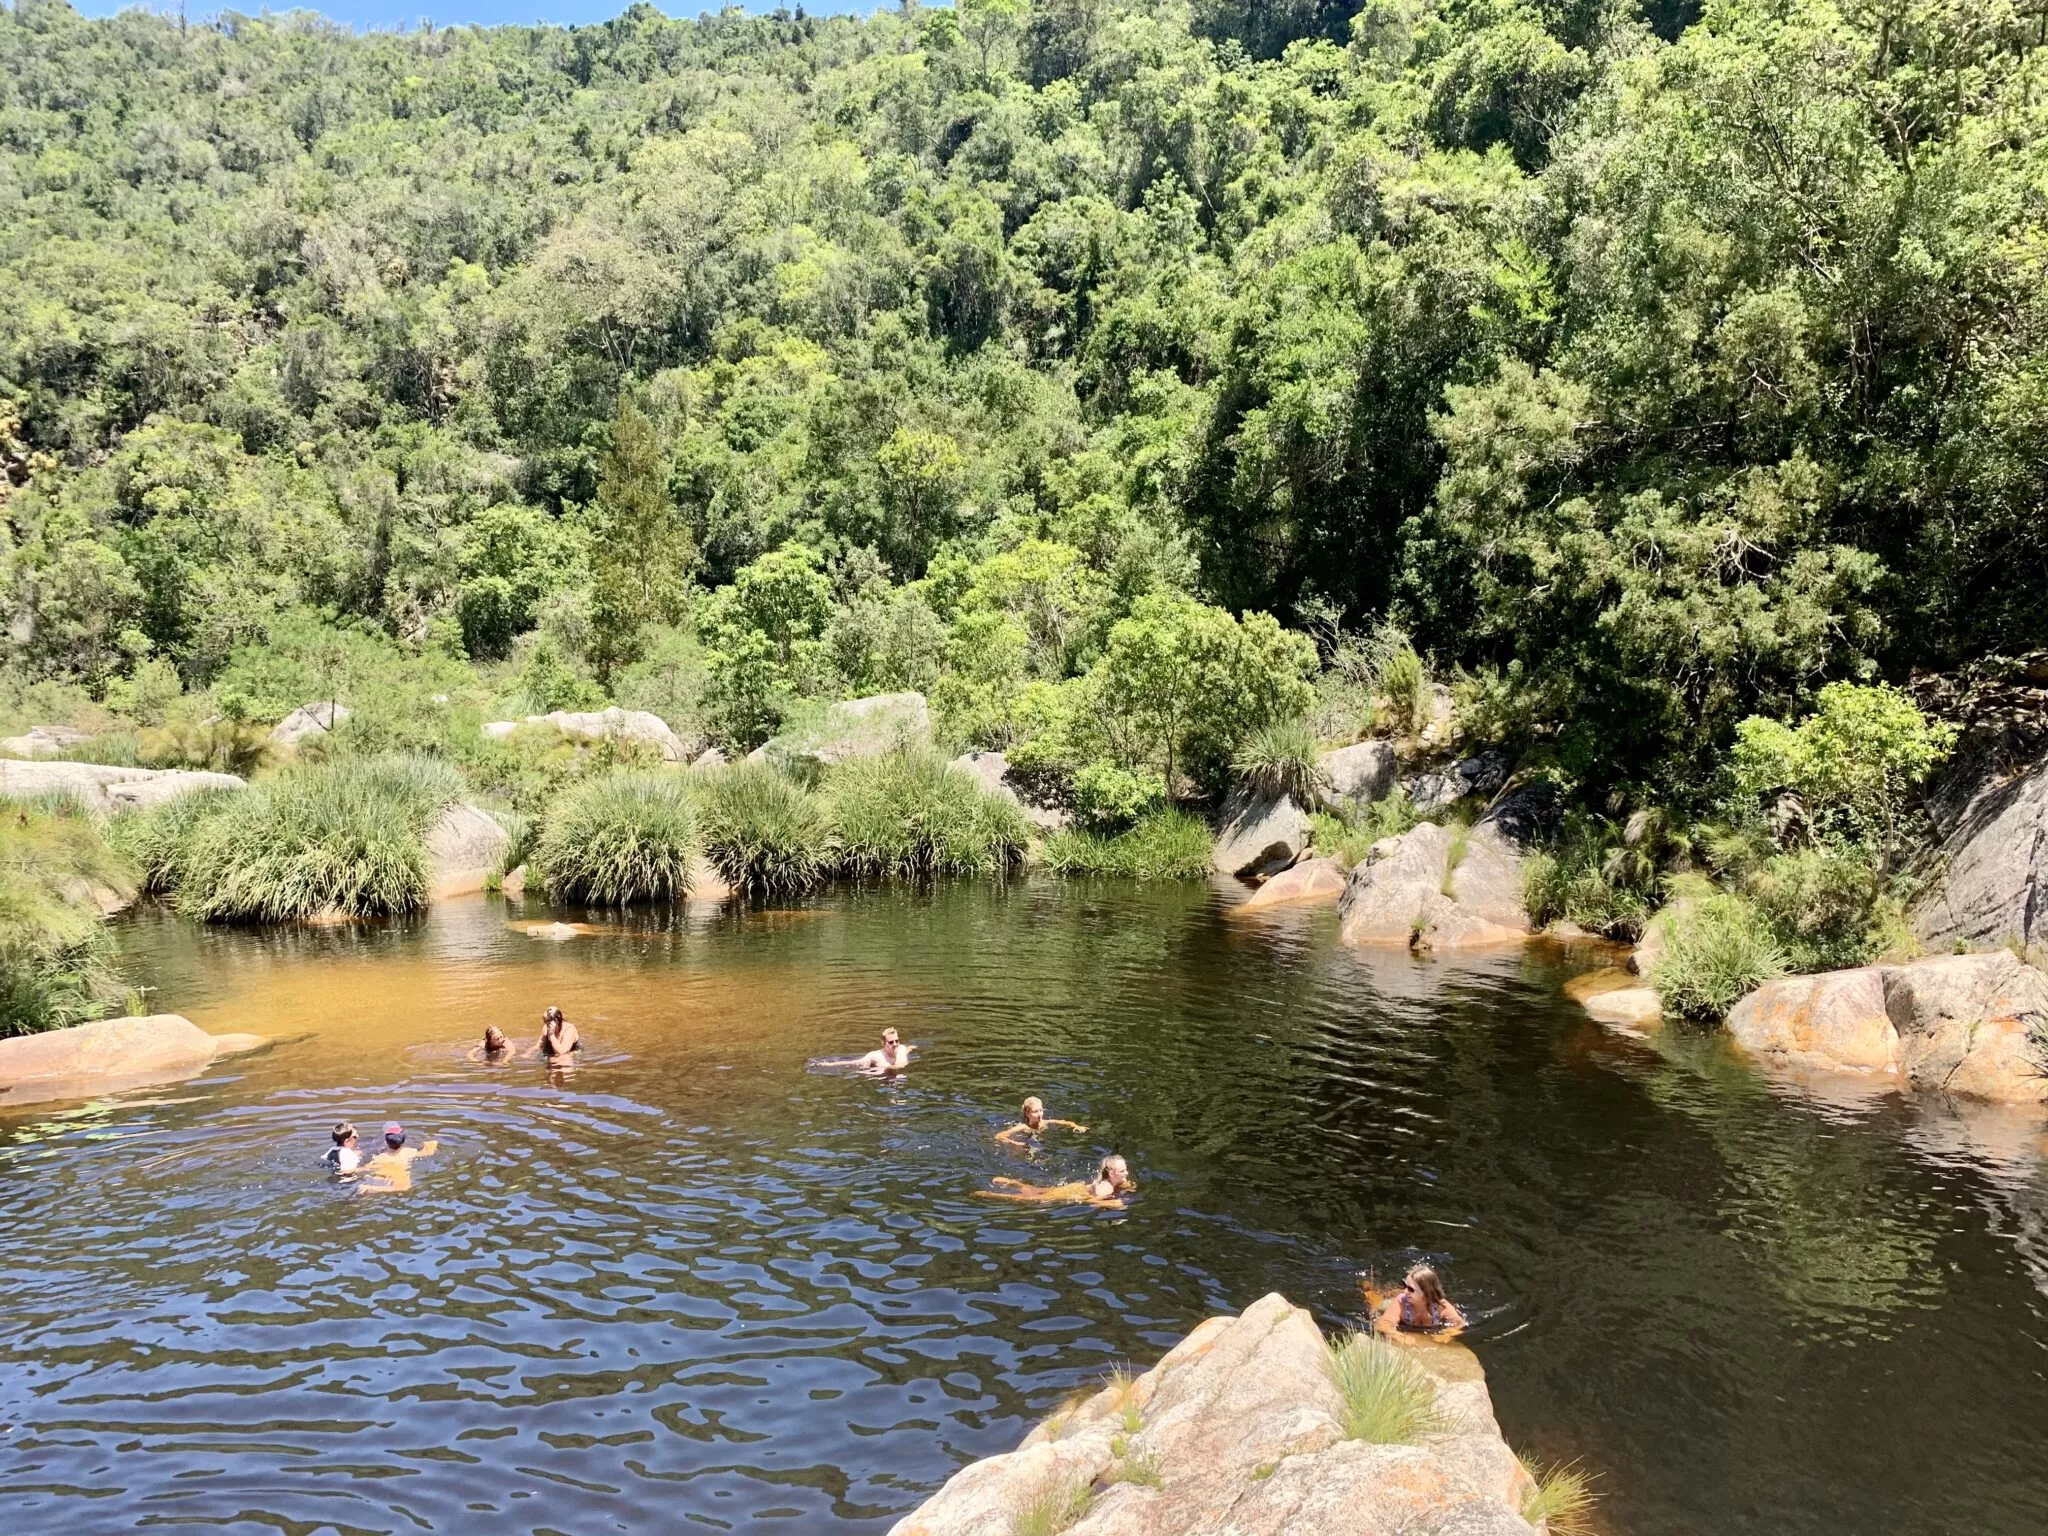 Cooling off in mountain rockpools